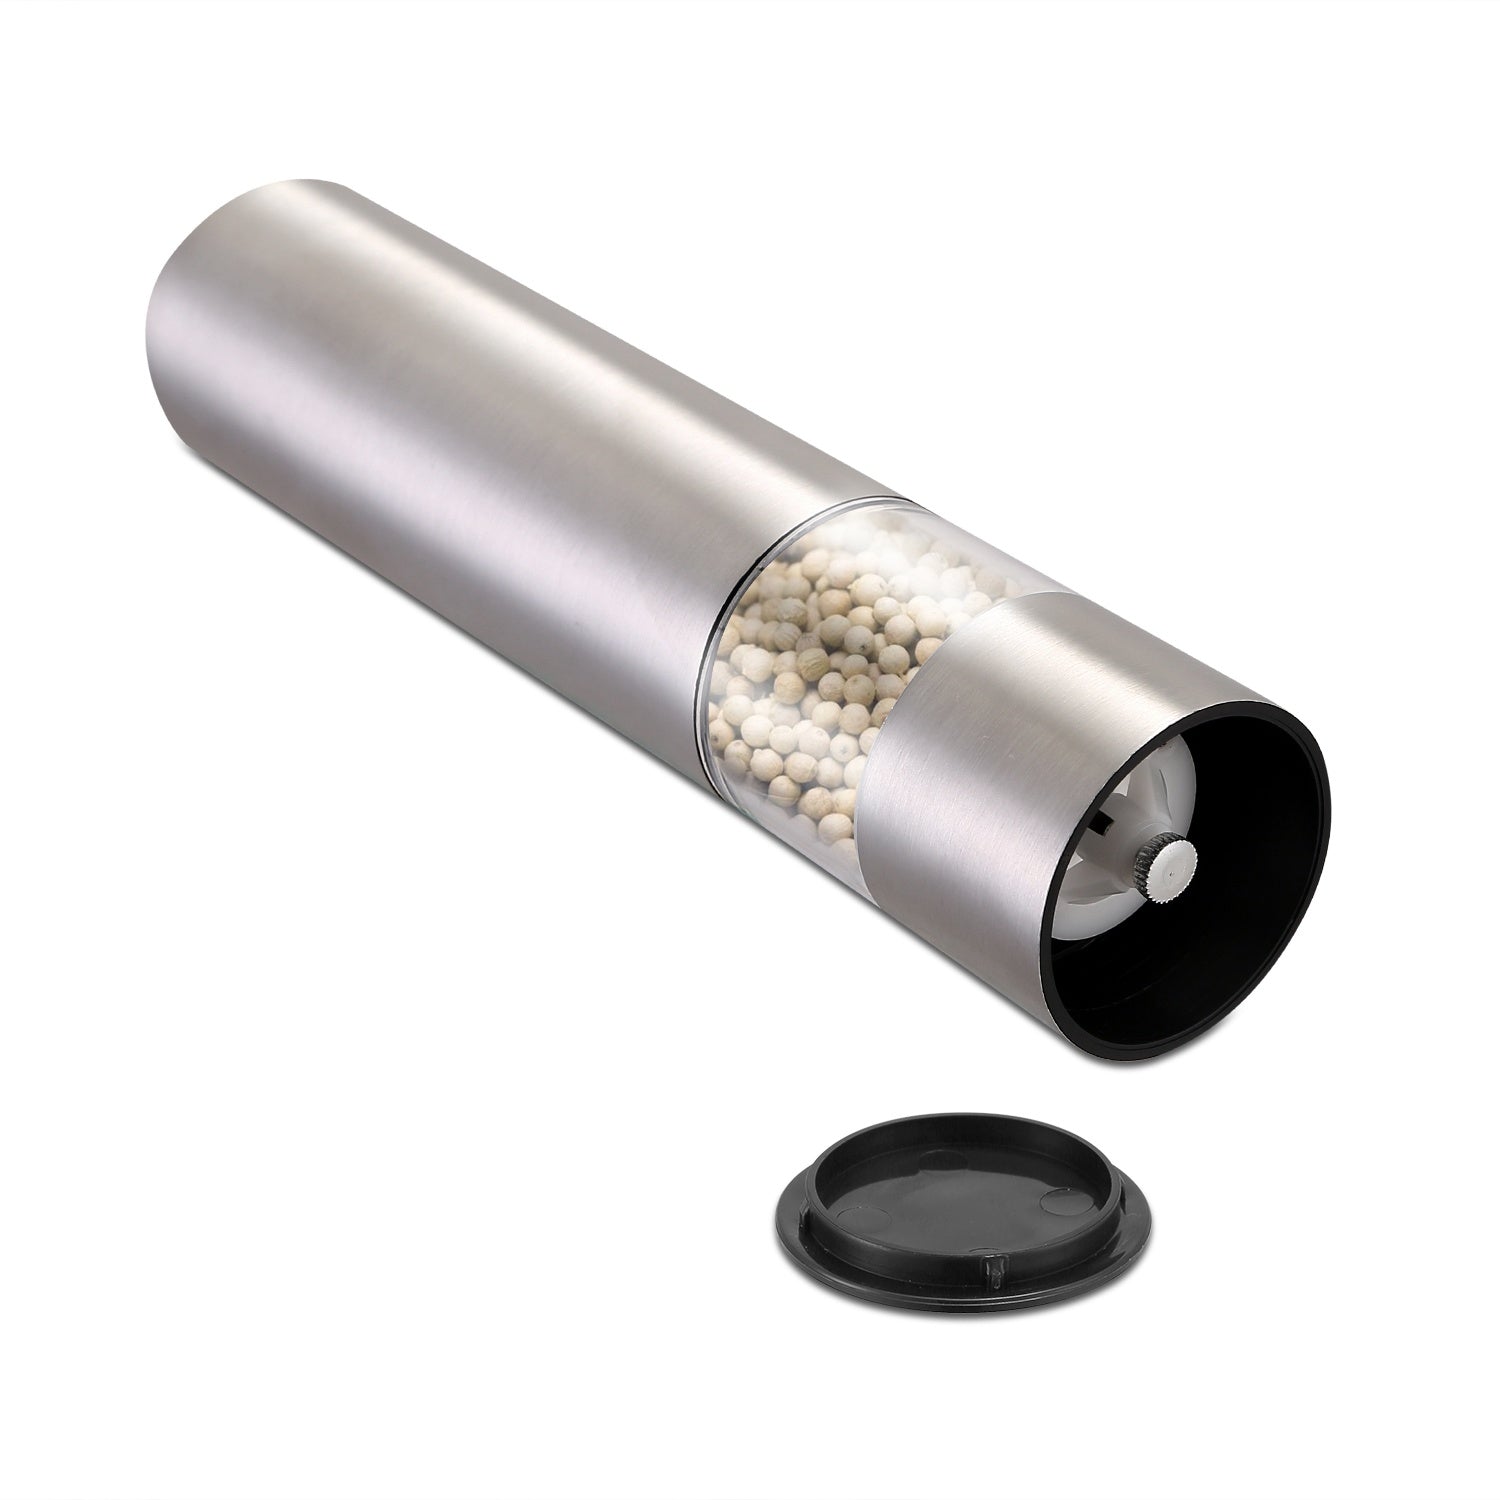 An Electric Salt Pepper Grinder with Light Adjustable Coarseness Stainless Steel Salt Pepper Shaker on a white background, offering convenient one-hand operation and saving time & energy.